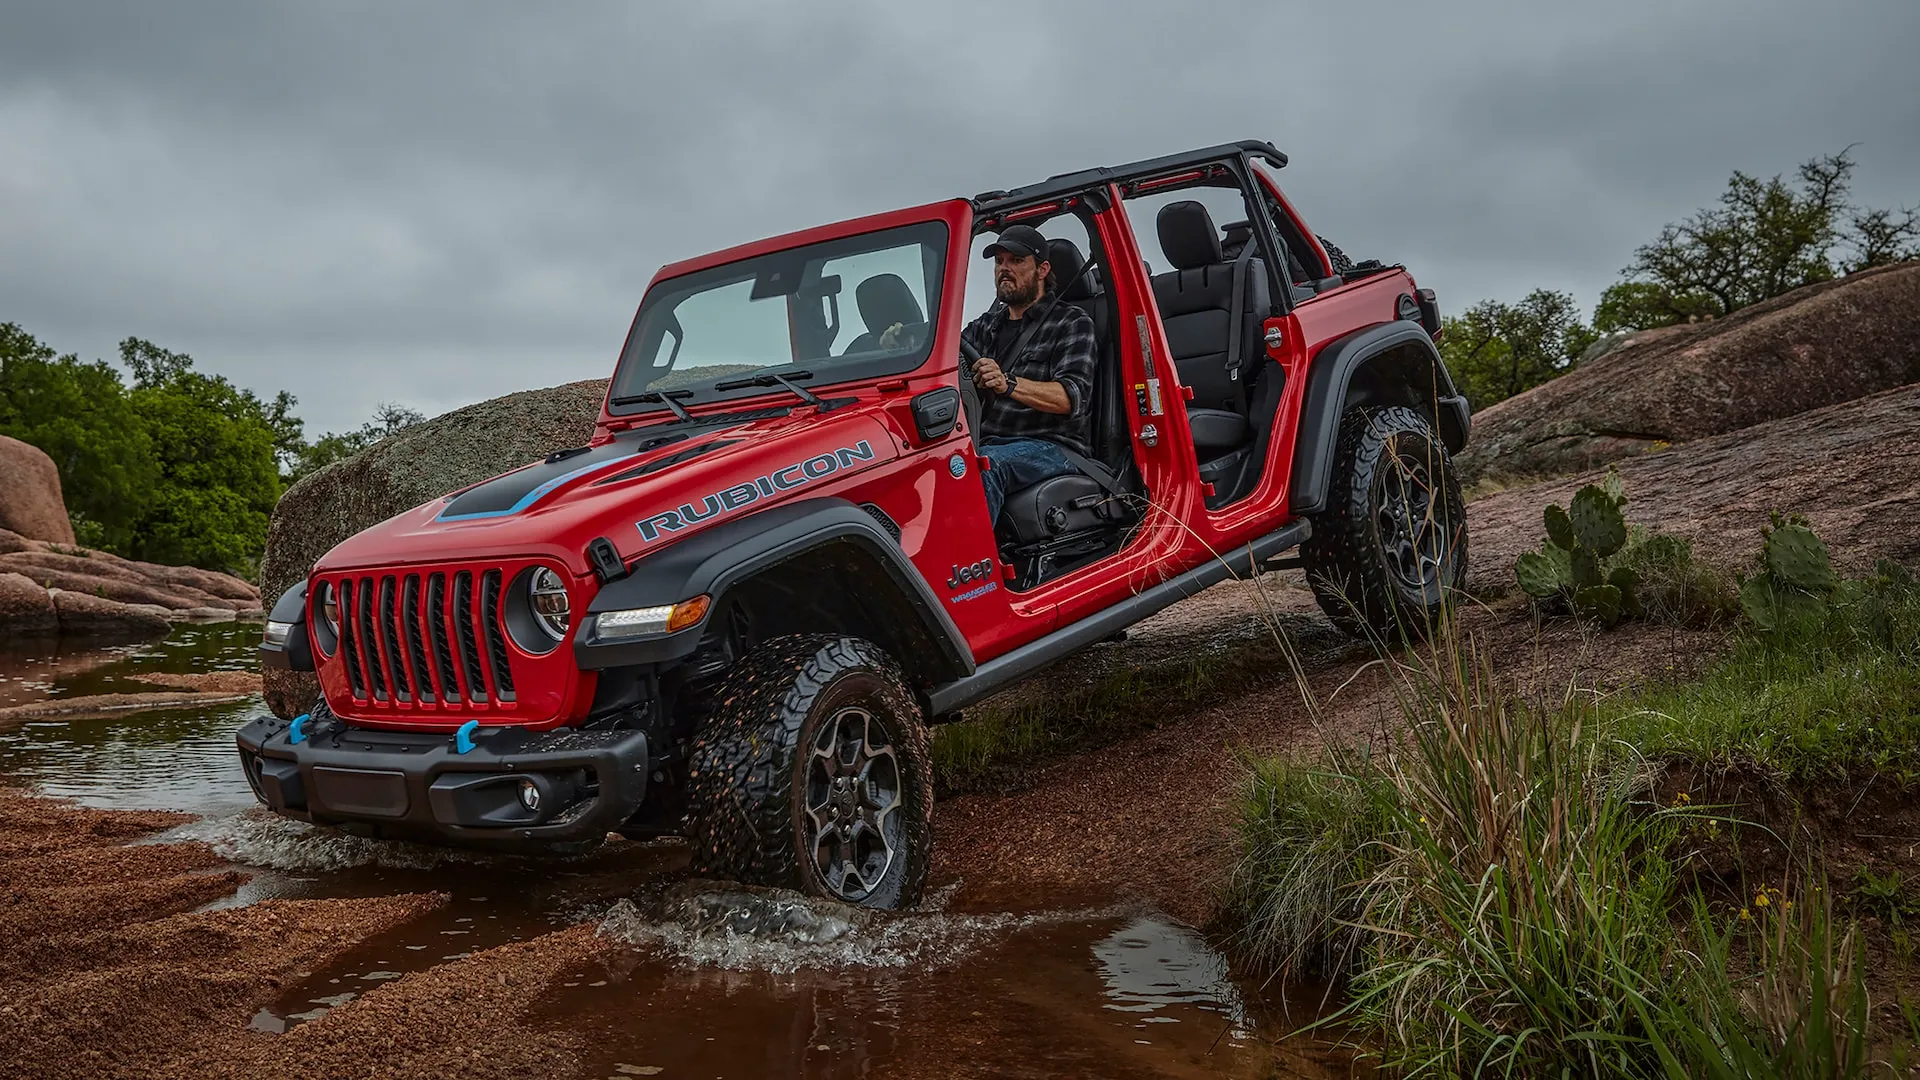 Jeep Wrangler Stays True to Its Roots New Hybrid Models Embrace Tradition While Looking to the Future---